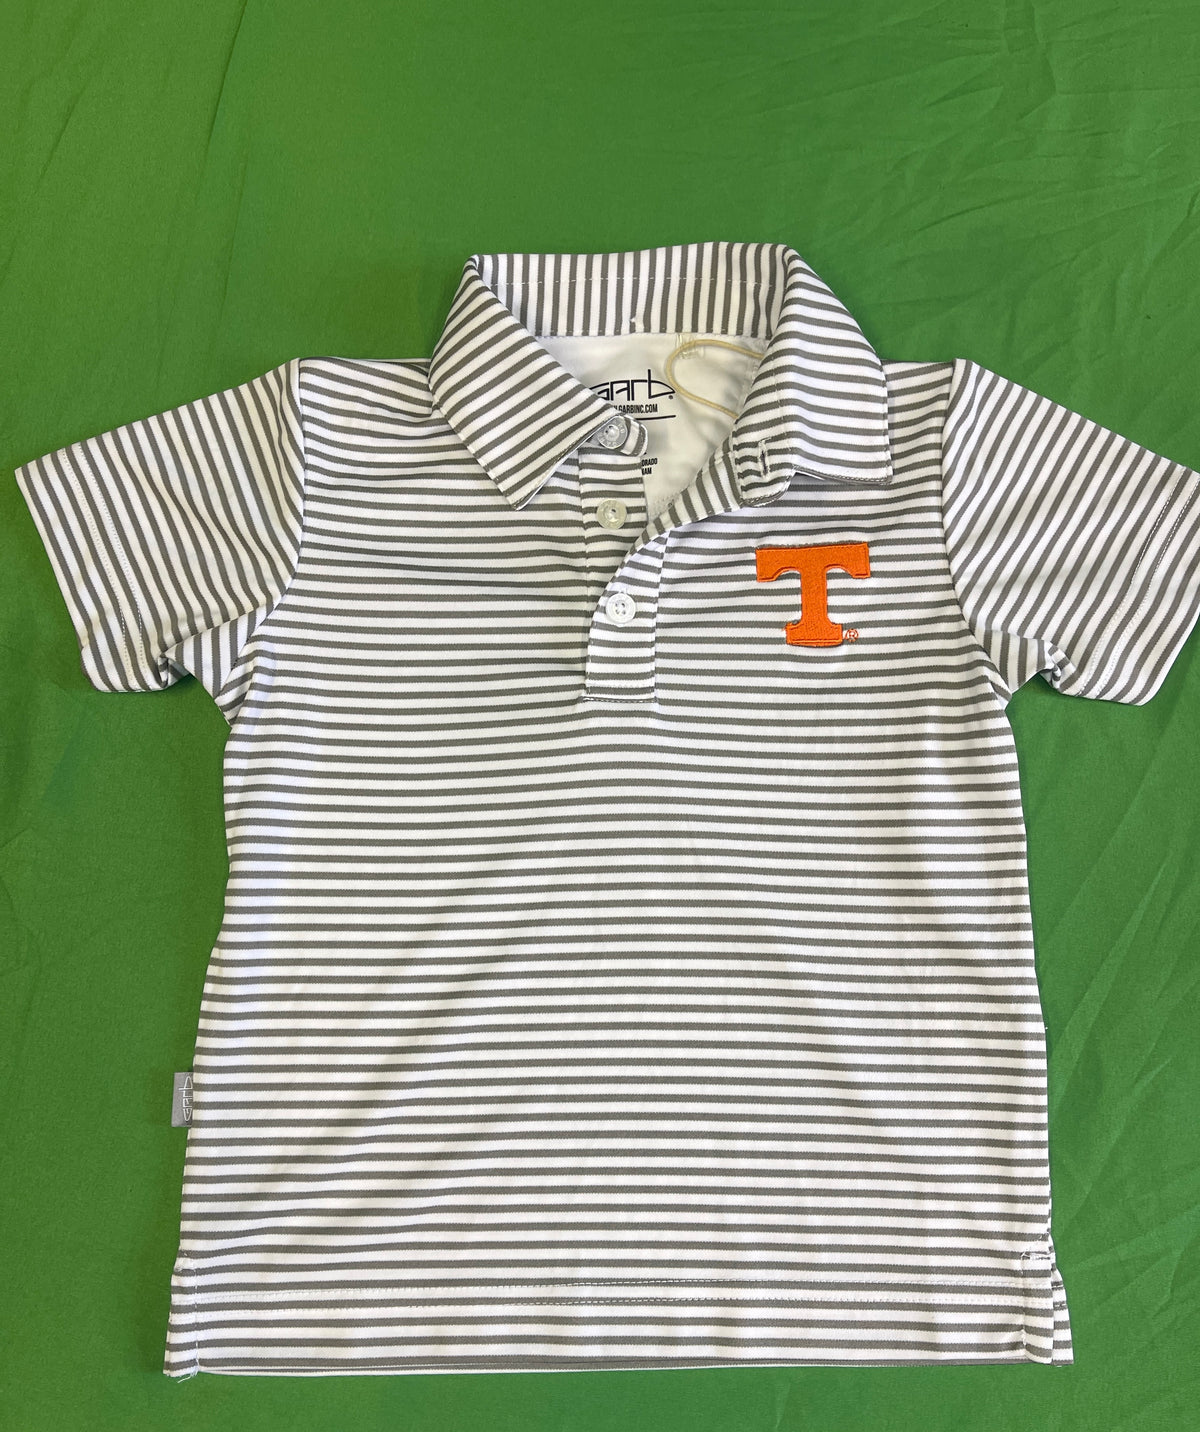 NCAA Tennessee Volunteers Striped Polo Shirt Toddler 2T NWT